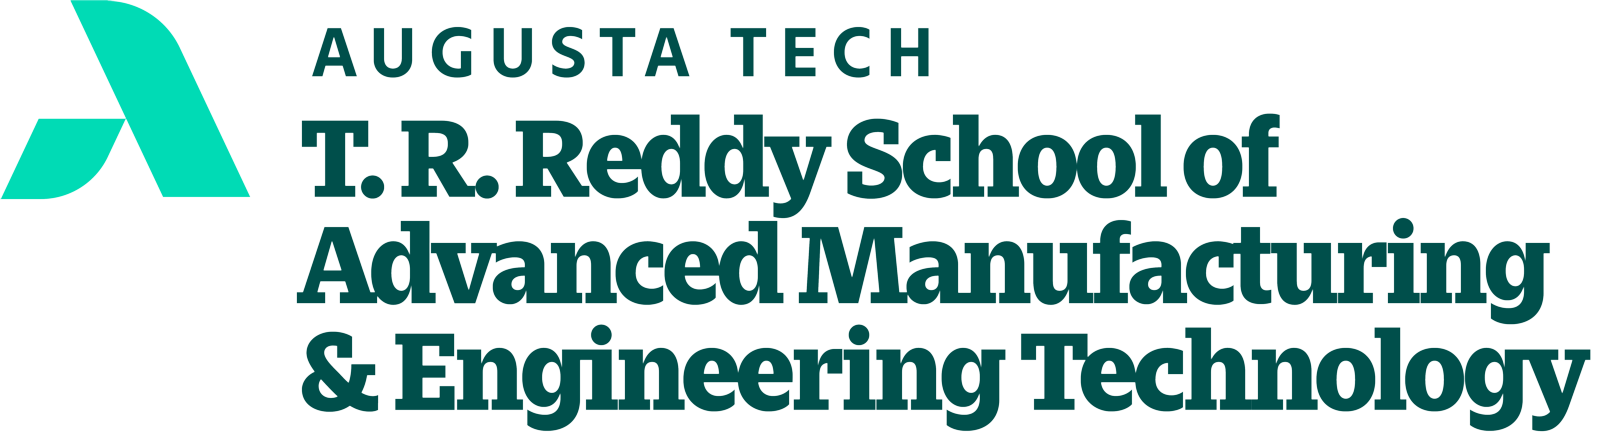 An uppercase abstract A in mint green composed of a smaller leg representing Augusta Technical College supporting the larger leg representing the Augusta Community and economy. The words Augusta Tech and T.R. Reddy School of Advanced Manufacturing & Enginering Technology are in heritage green font to the right of the a, stacked in three horizontal rows with T.R. Reddy Advanced Manufacturing & Engineering Technology in bold font.